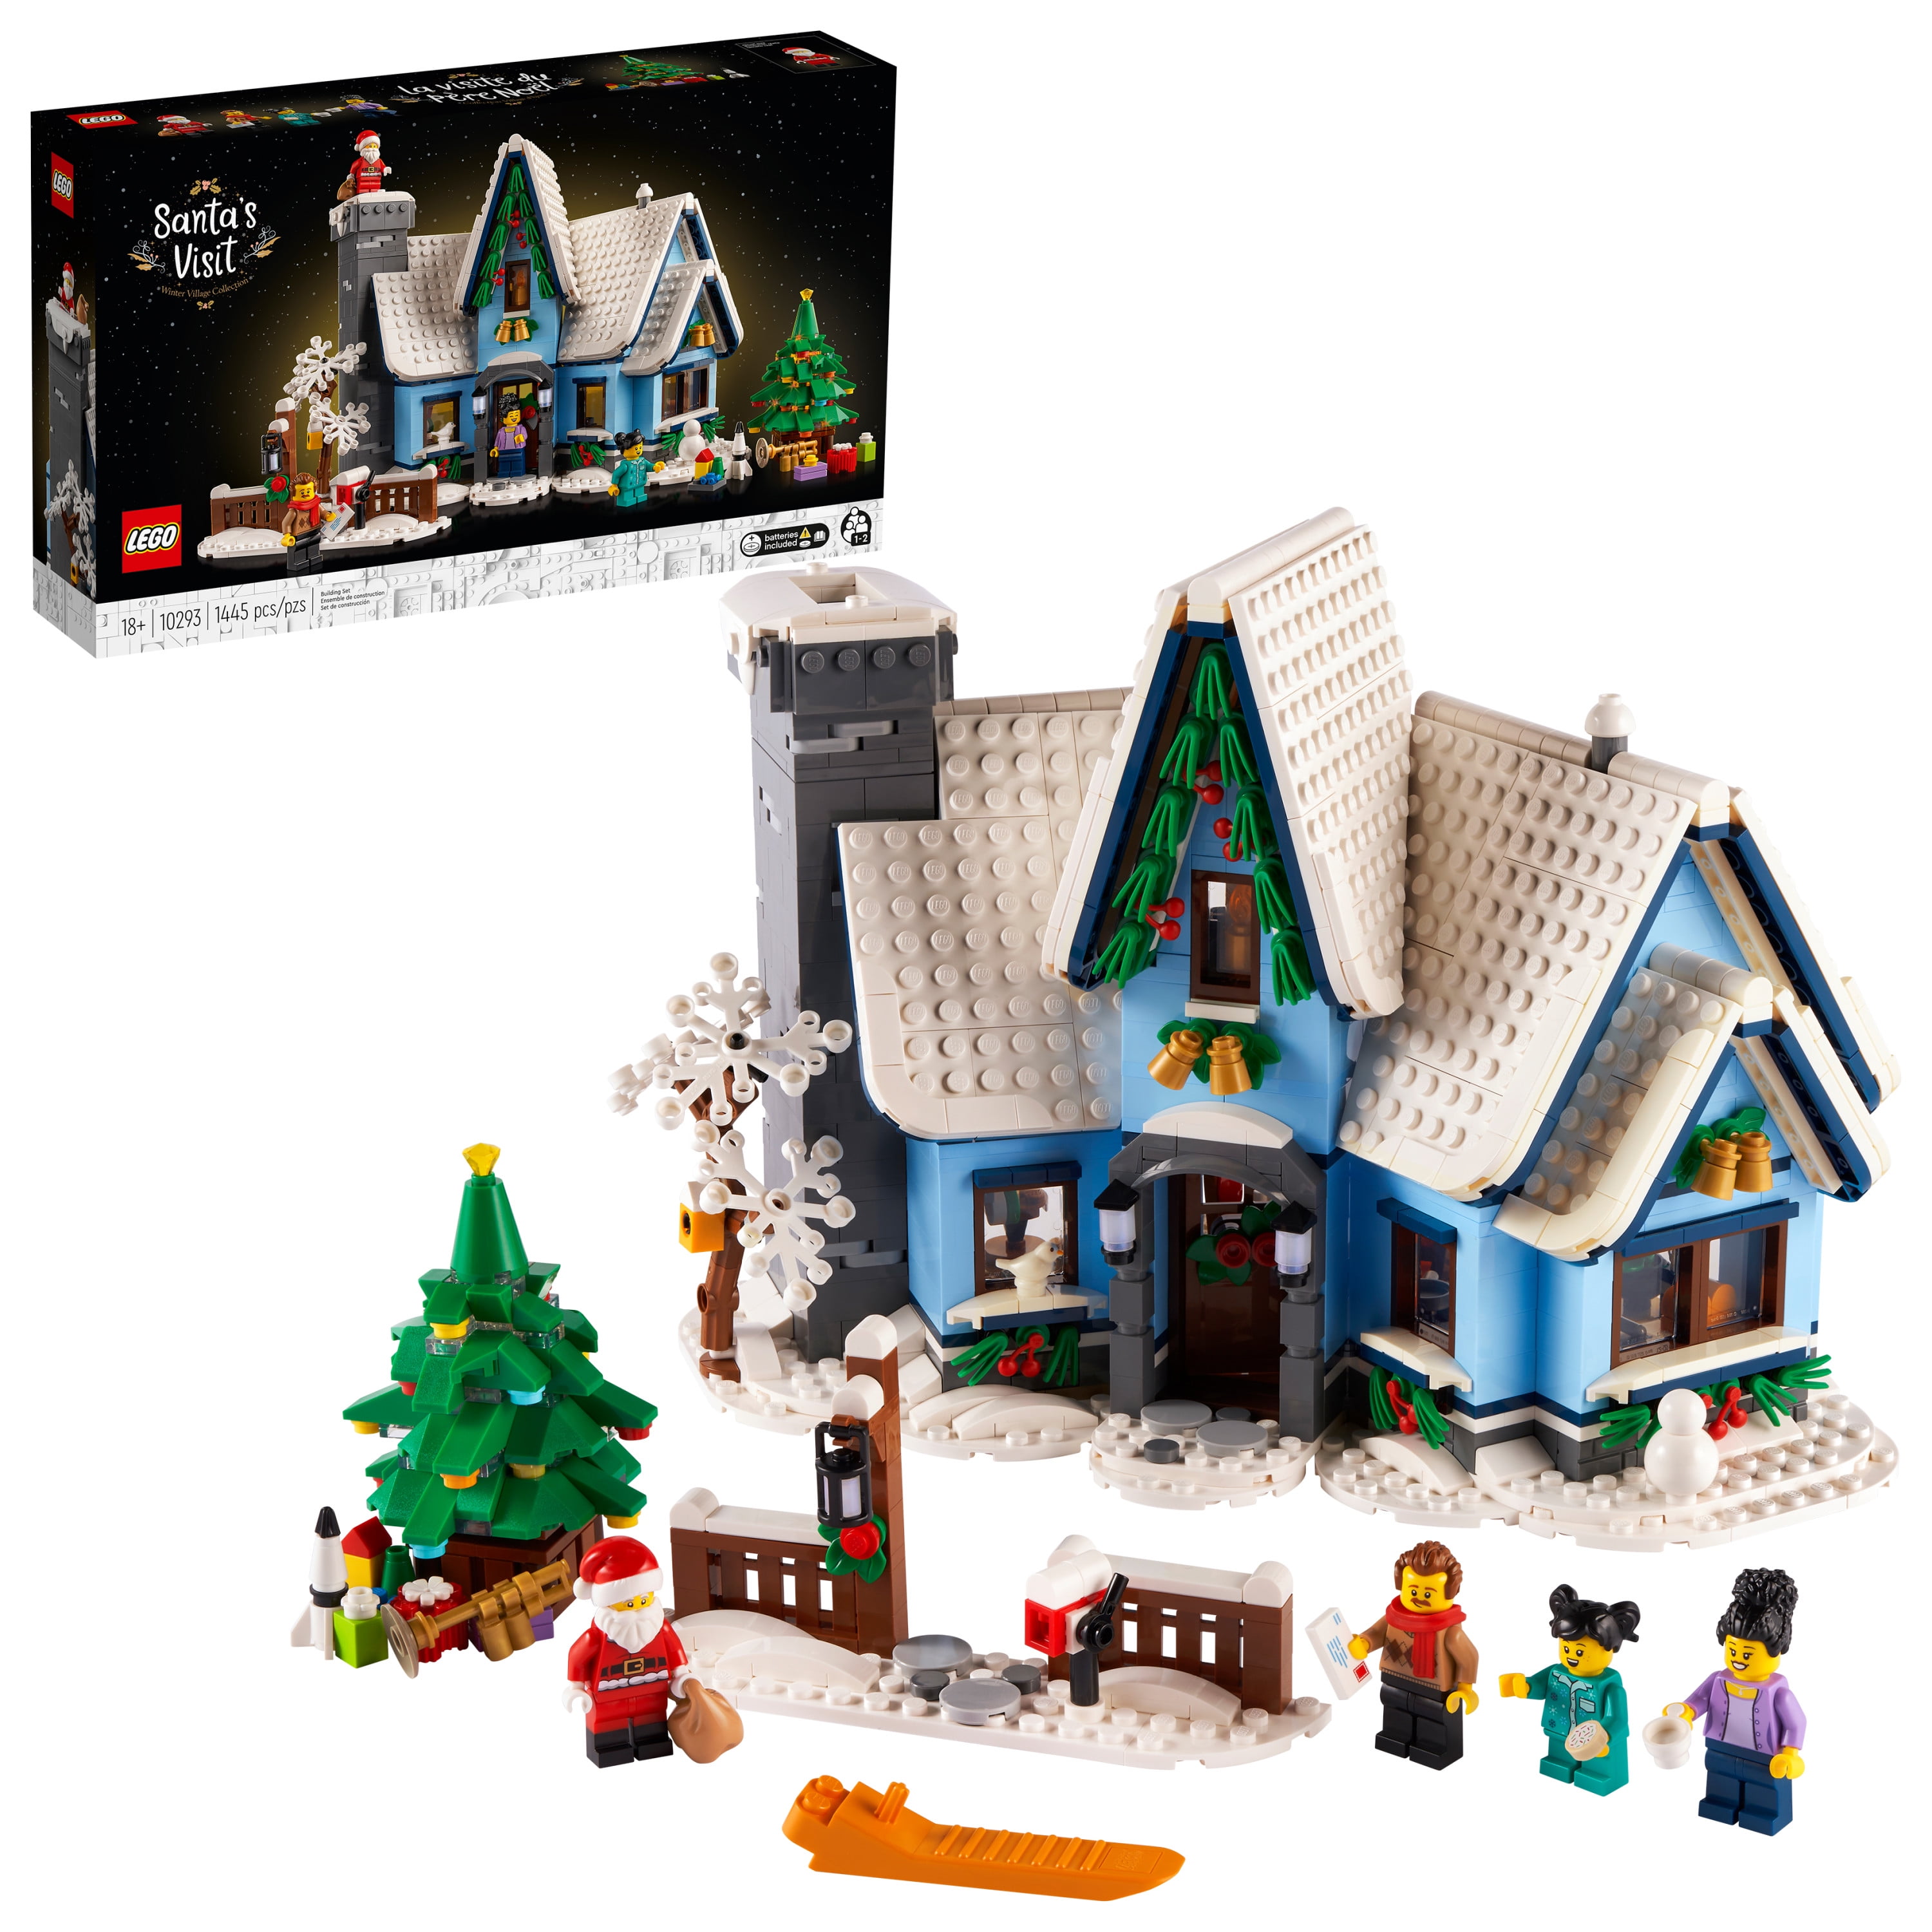 Moderne Skalk Celebrity LEGO Icons Santa's Visit 10293 Christmas House Model Building Set for  Adults and Families, Festive Home Décor with Xmas Tree, Gift Idea -  Walmart.com